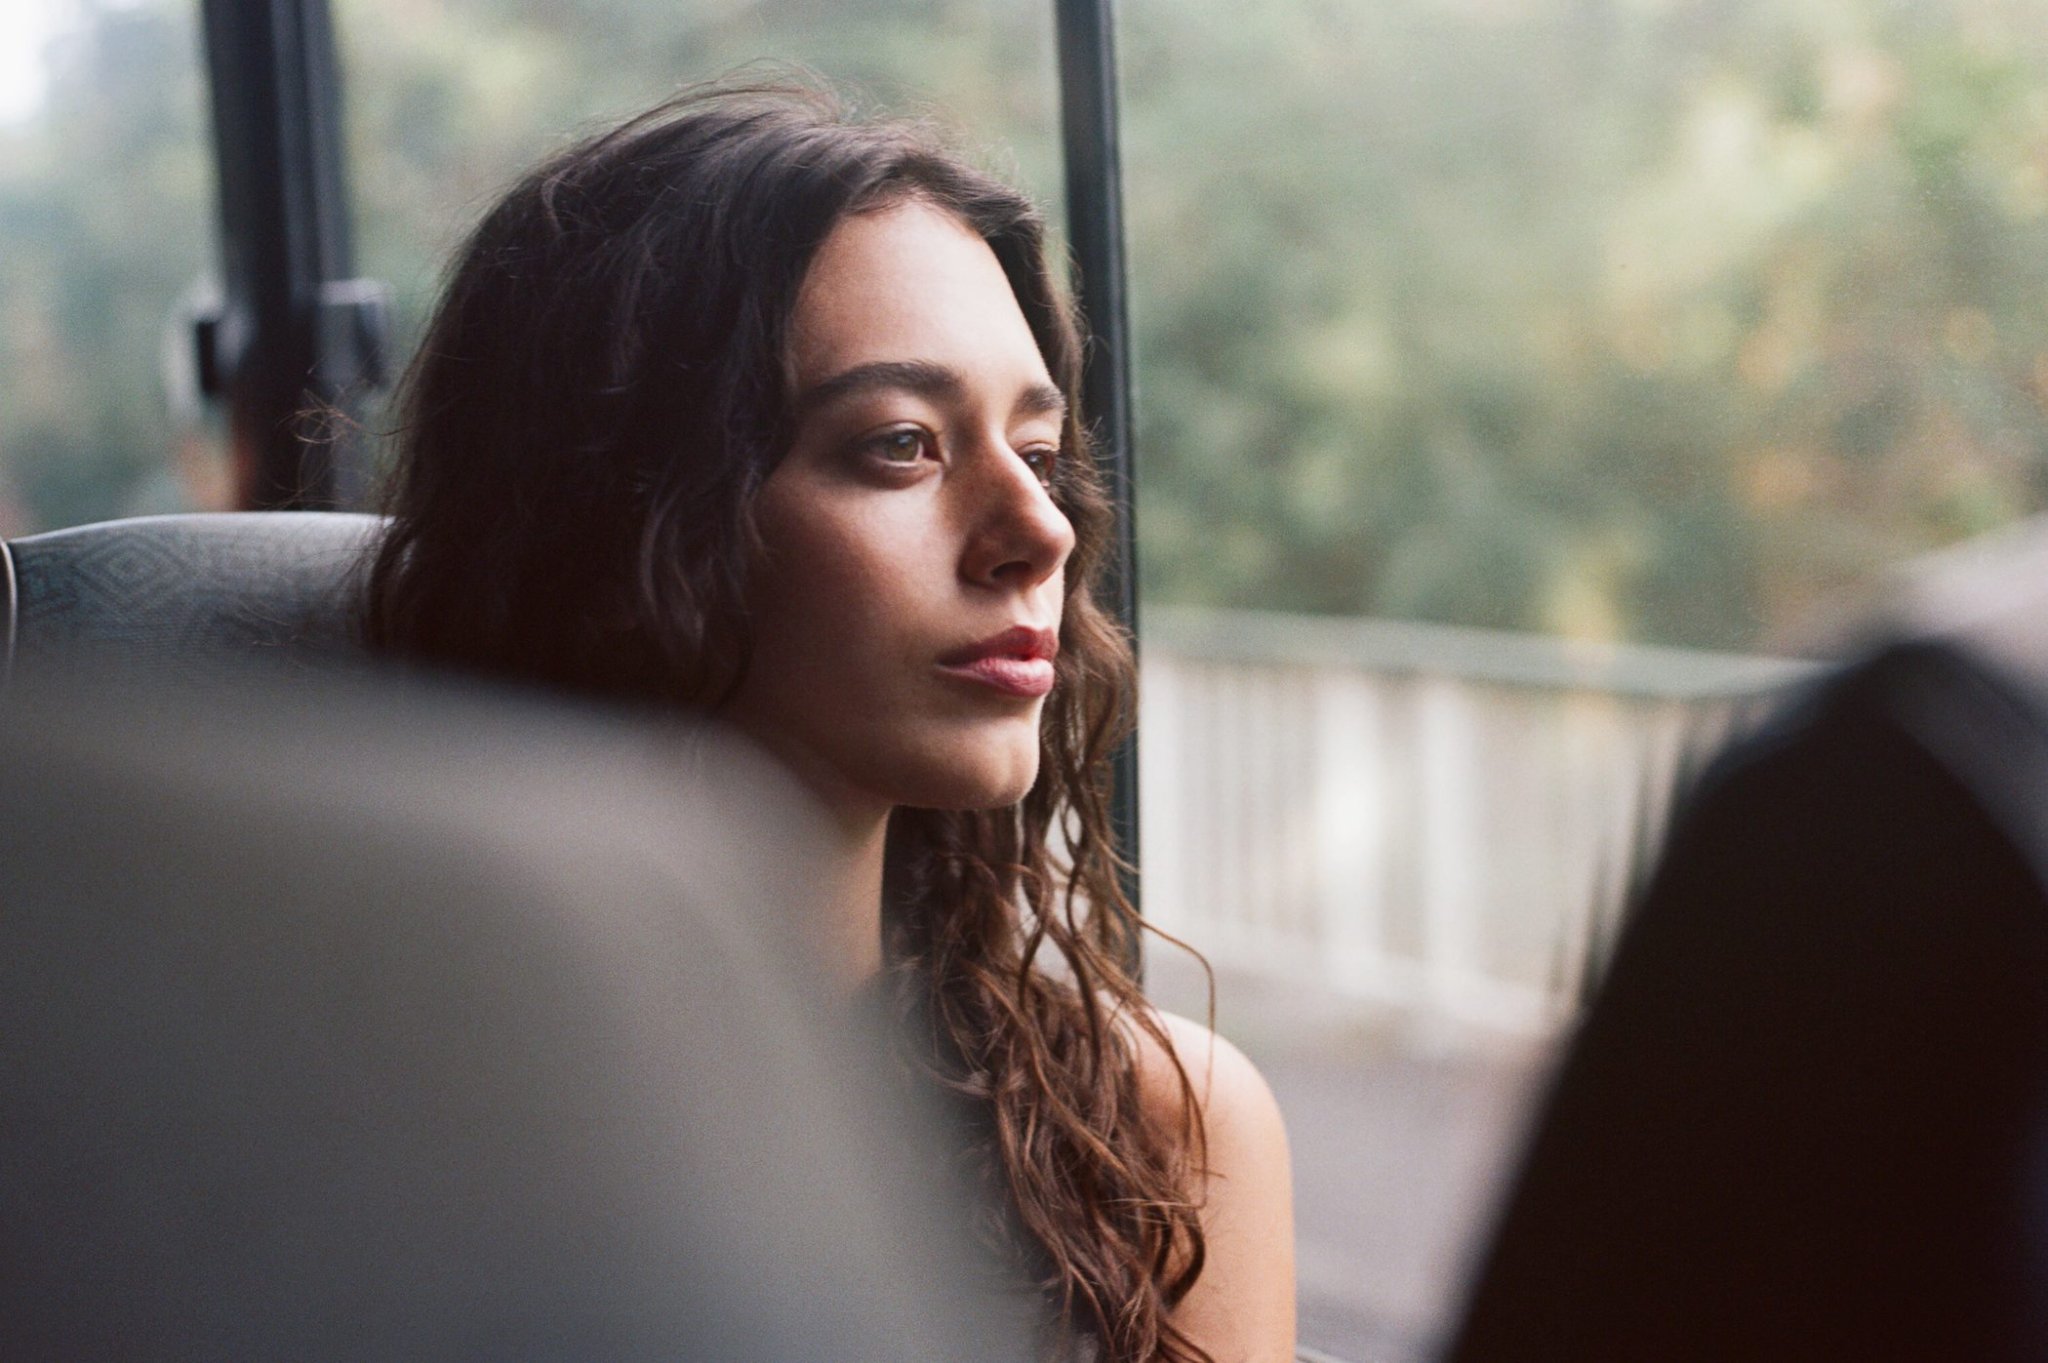 7 Reasons You Keep Thinking About Someone—and How to Stop